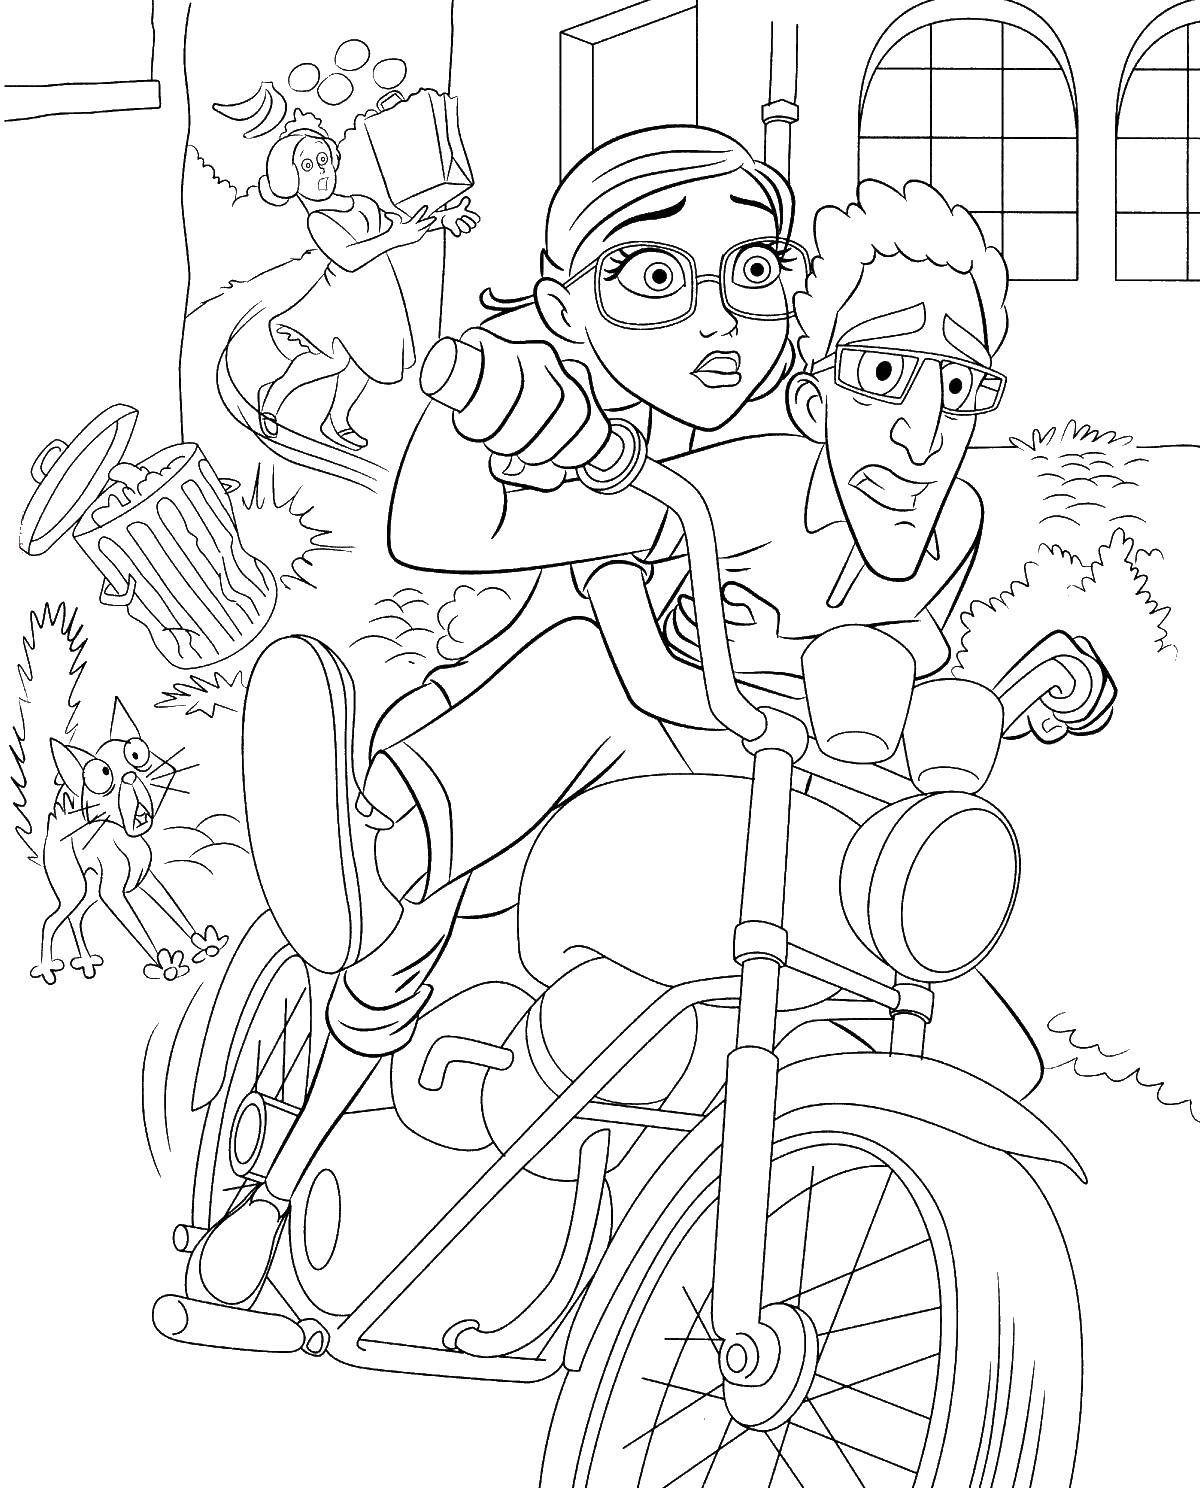 Coloring Motorcyclists. Category for boys . Tags:  motorcycle.